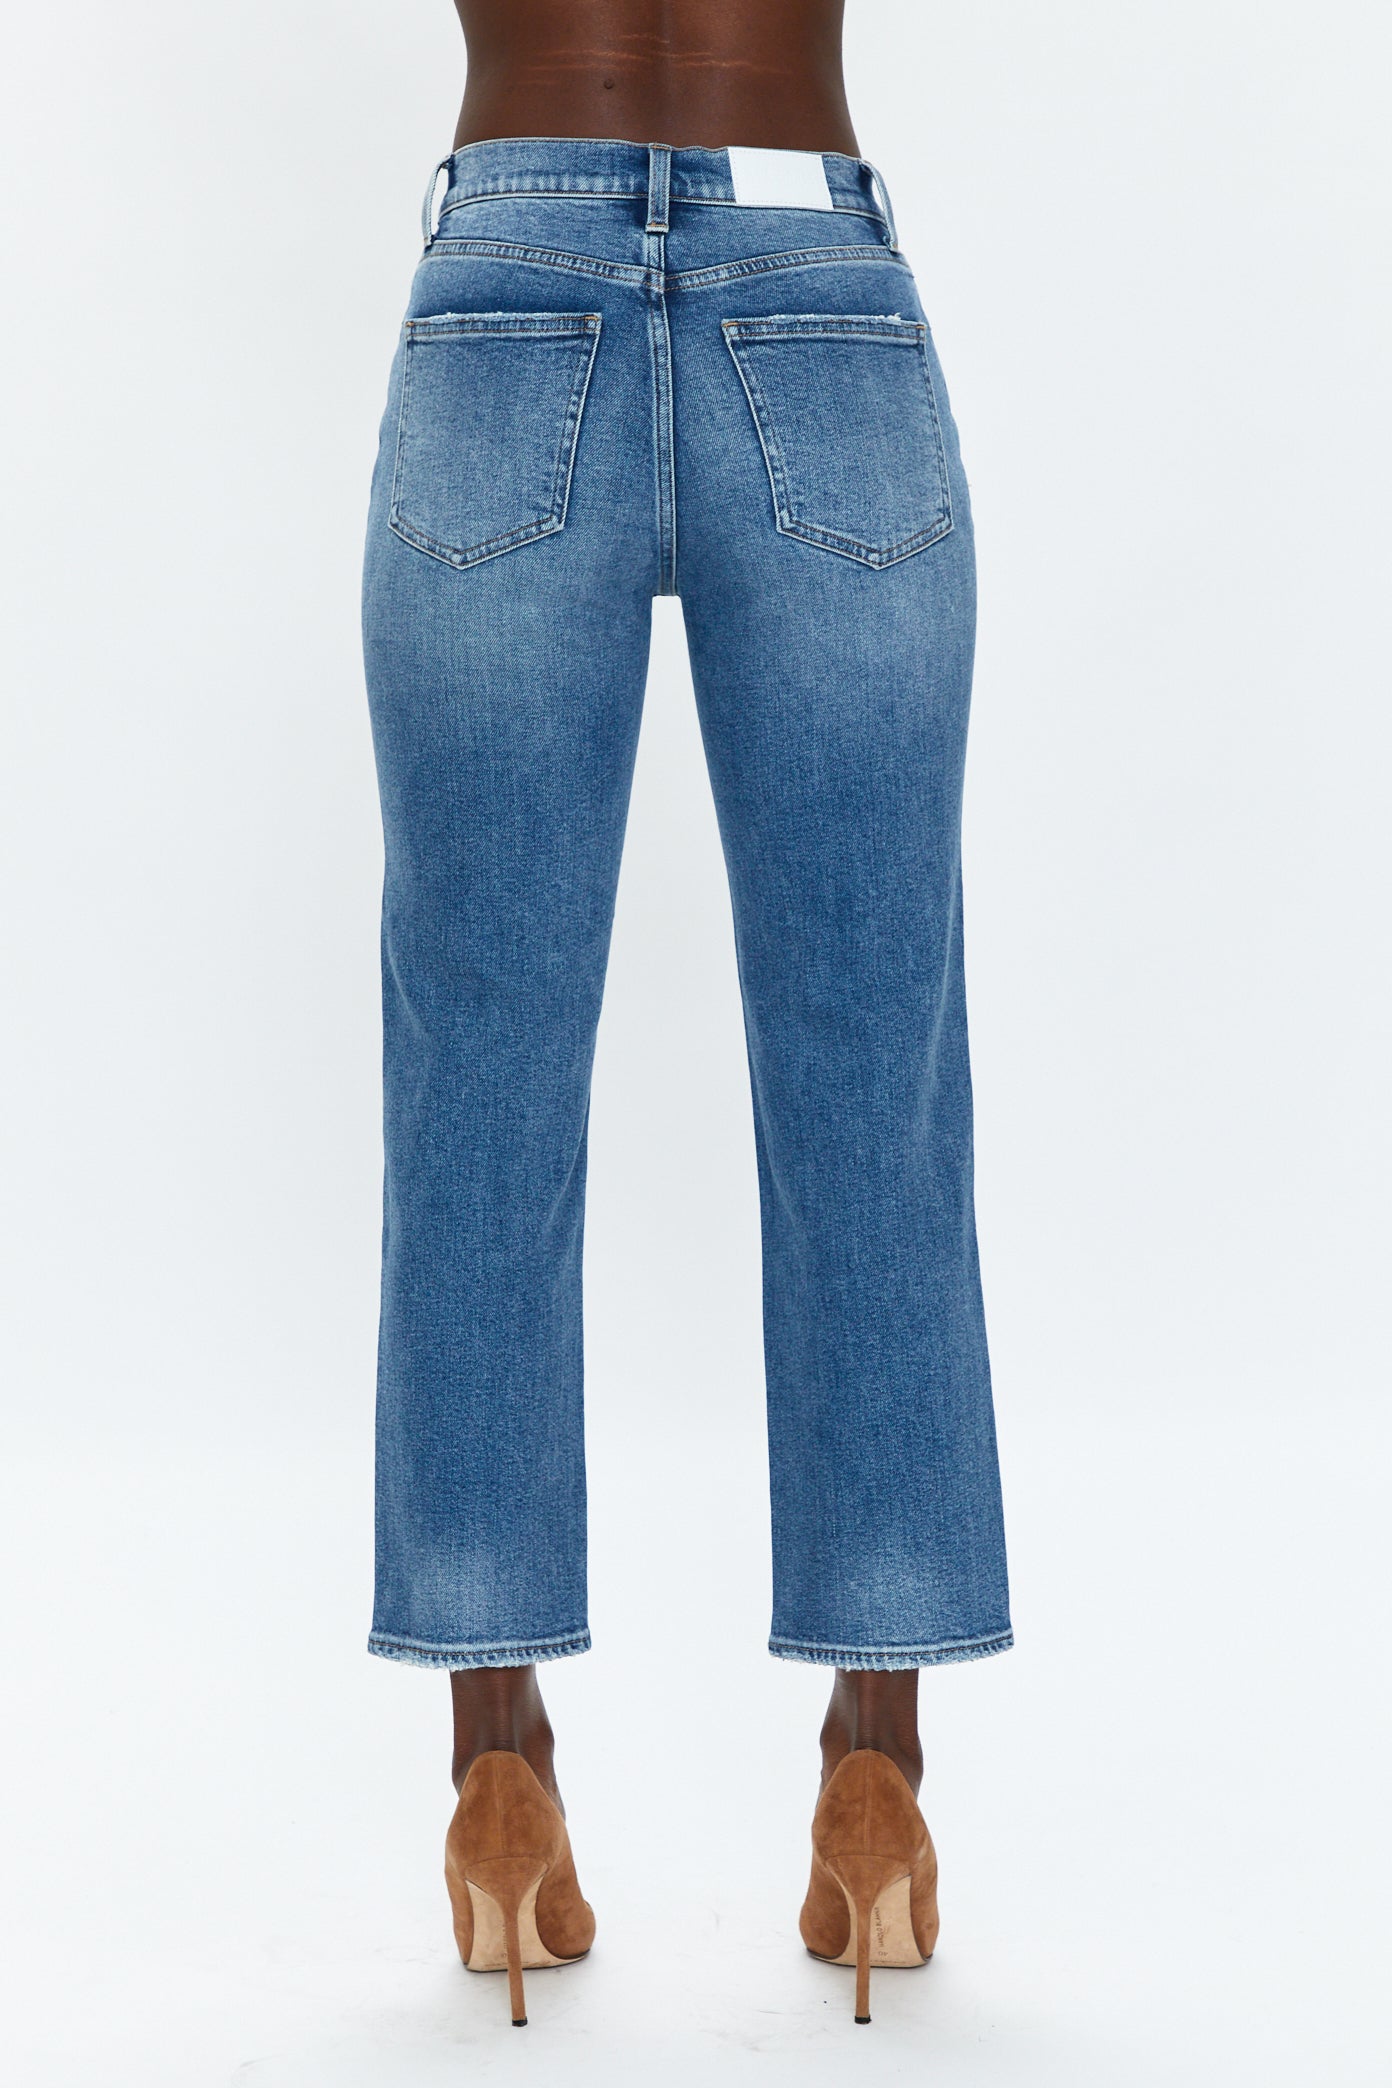 – Classic Rise - Charlie Westminster Vintage High Straight Pistola Ankle Denim